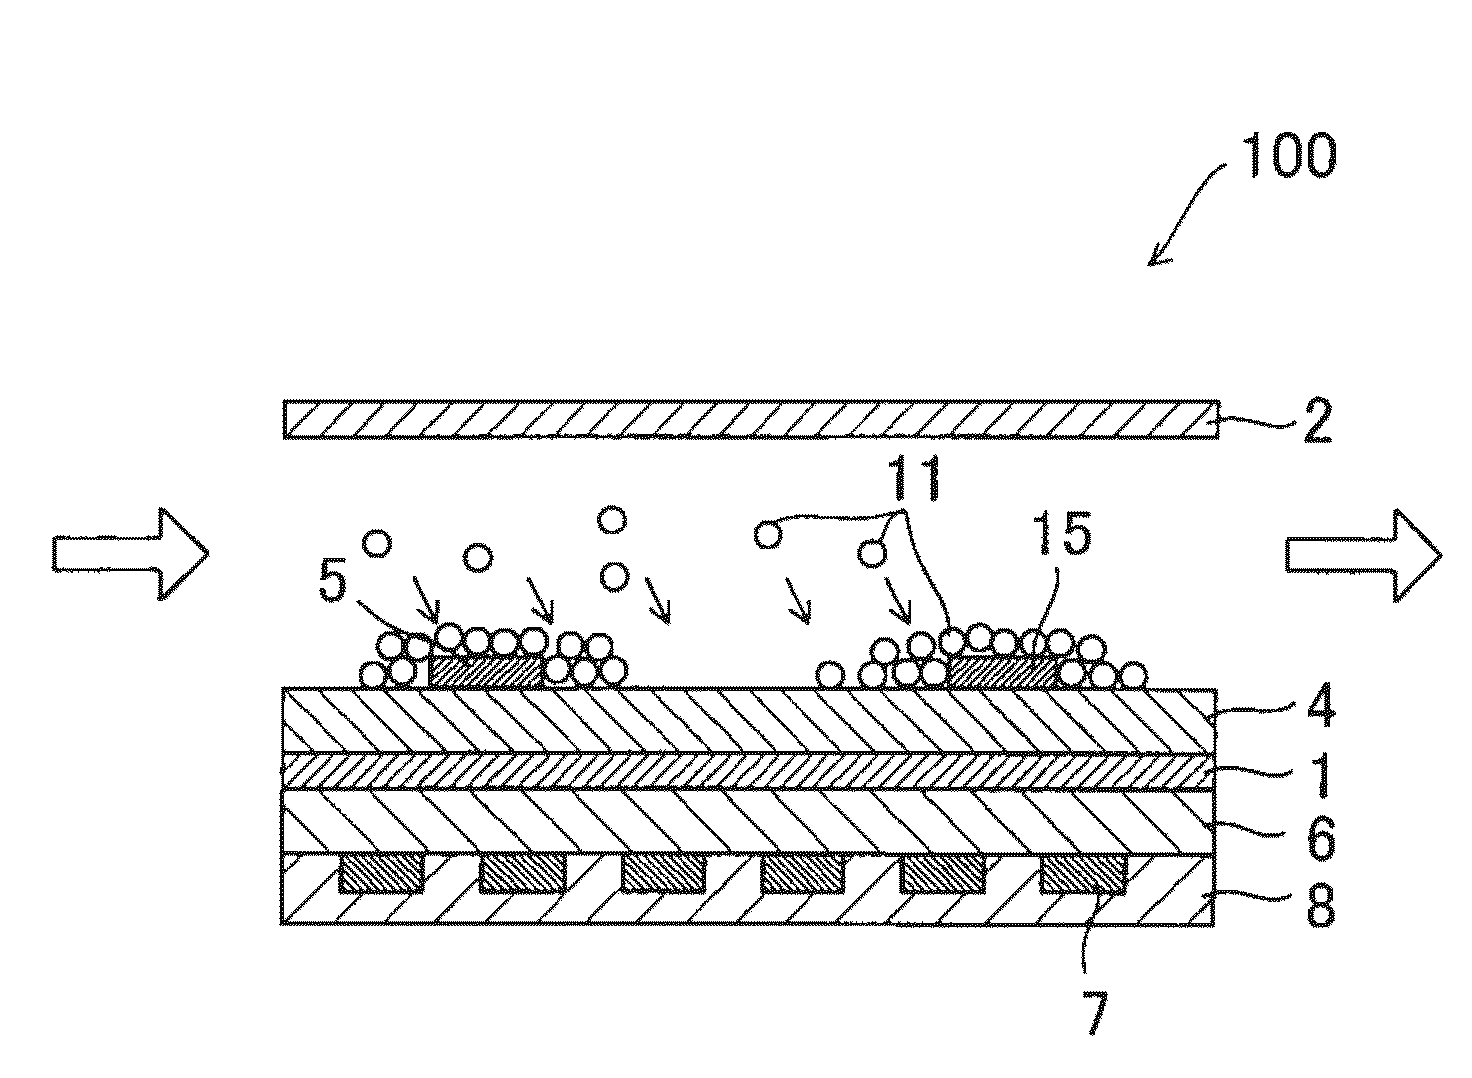 Particulate matter detection device